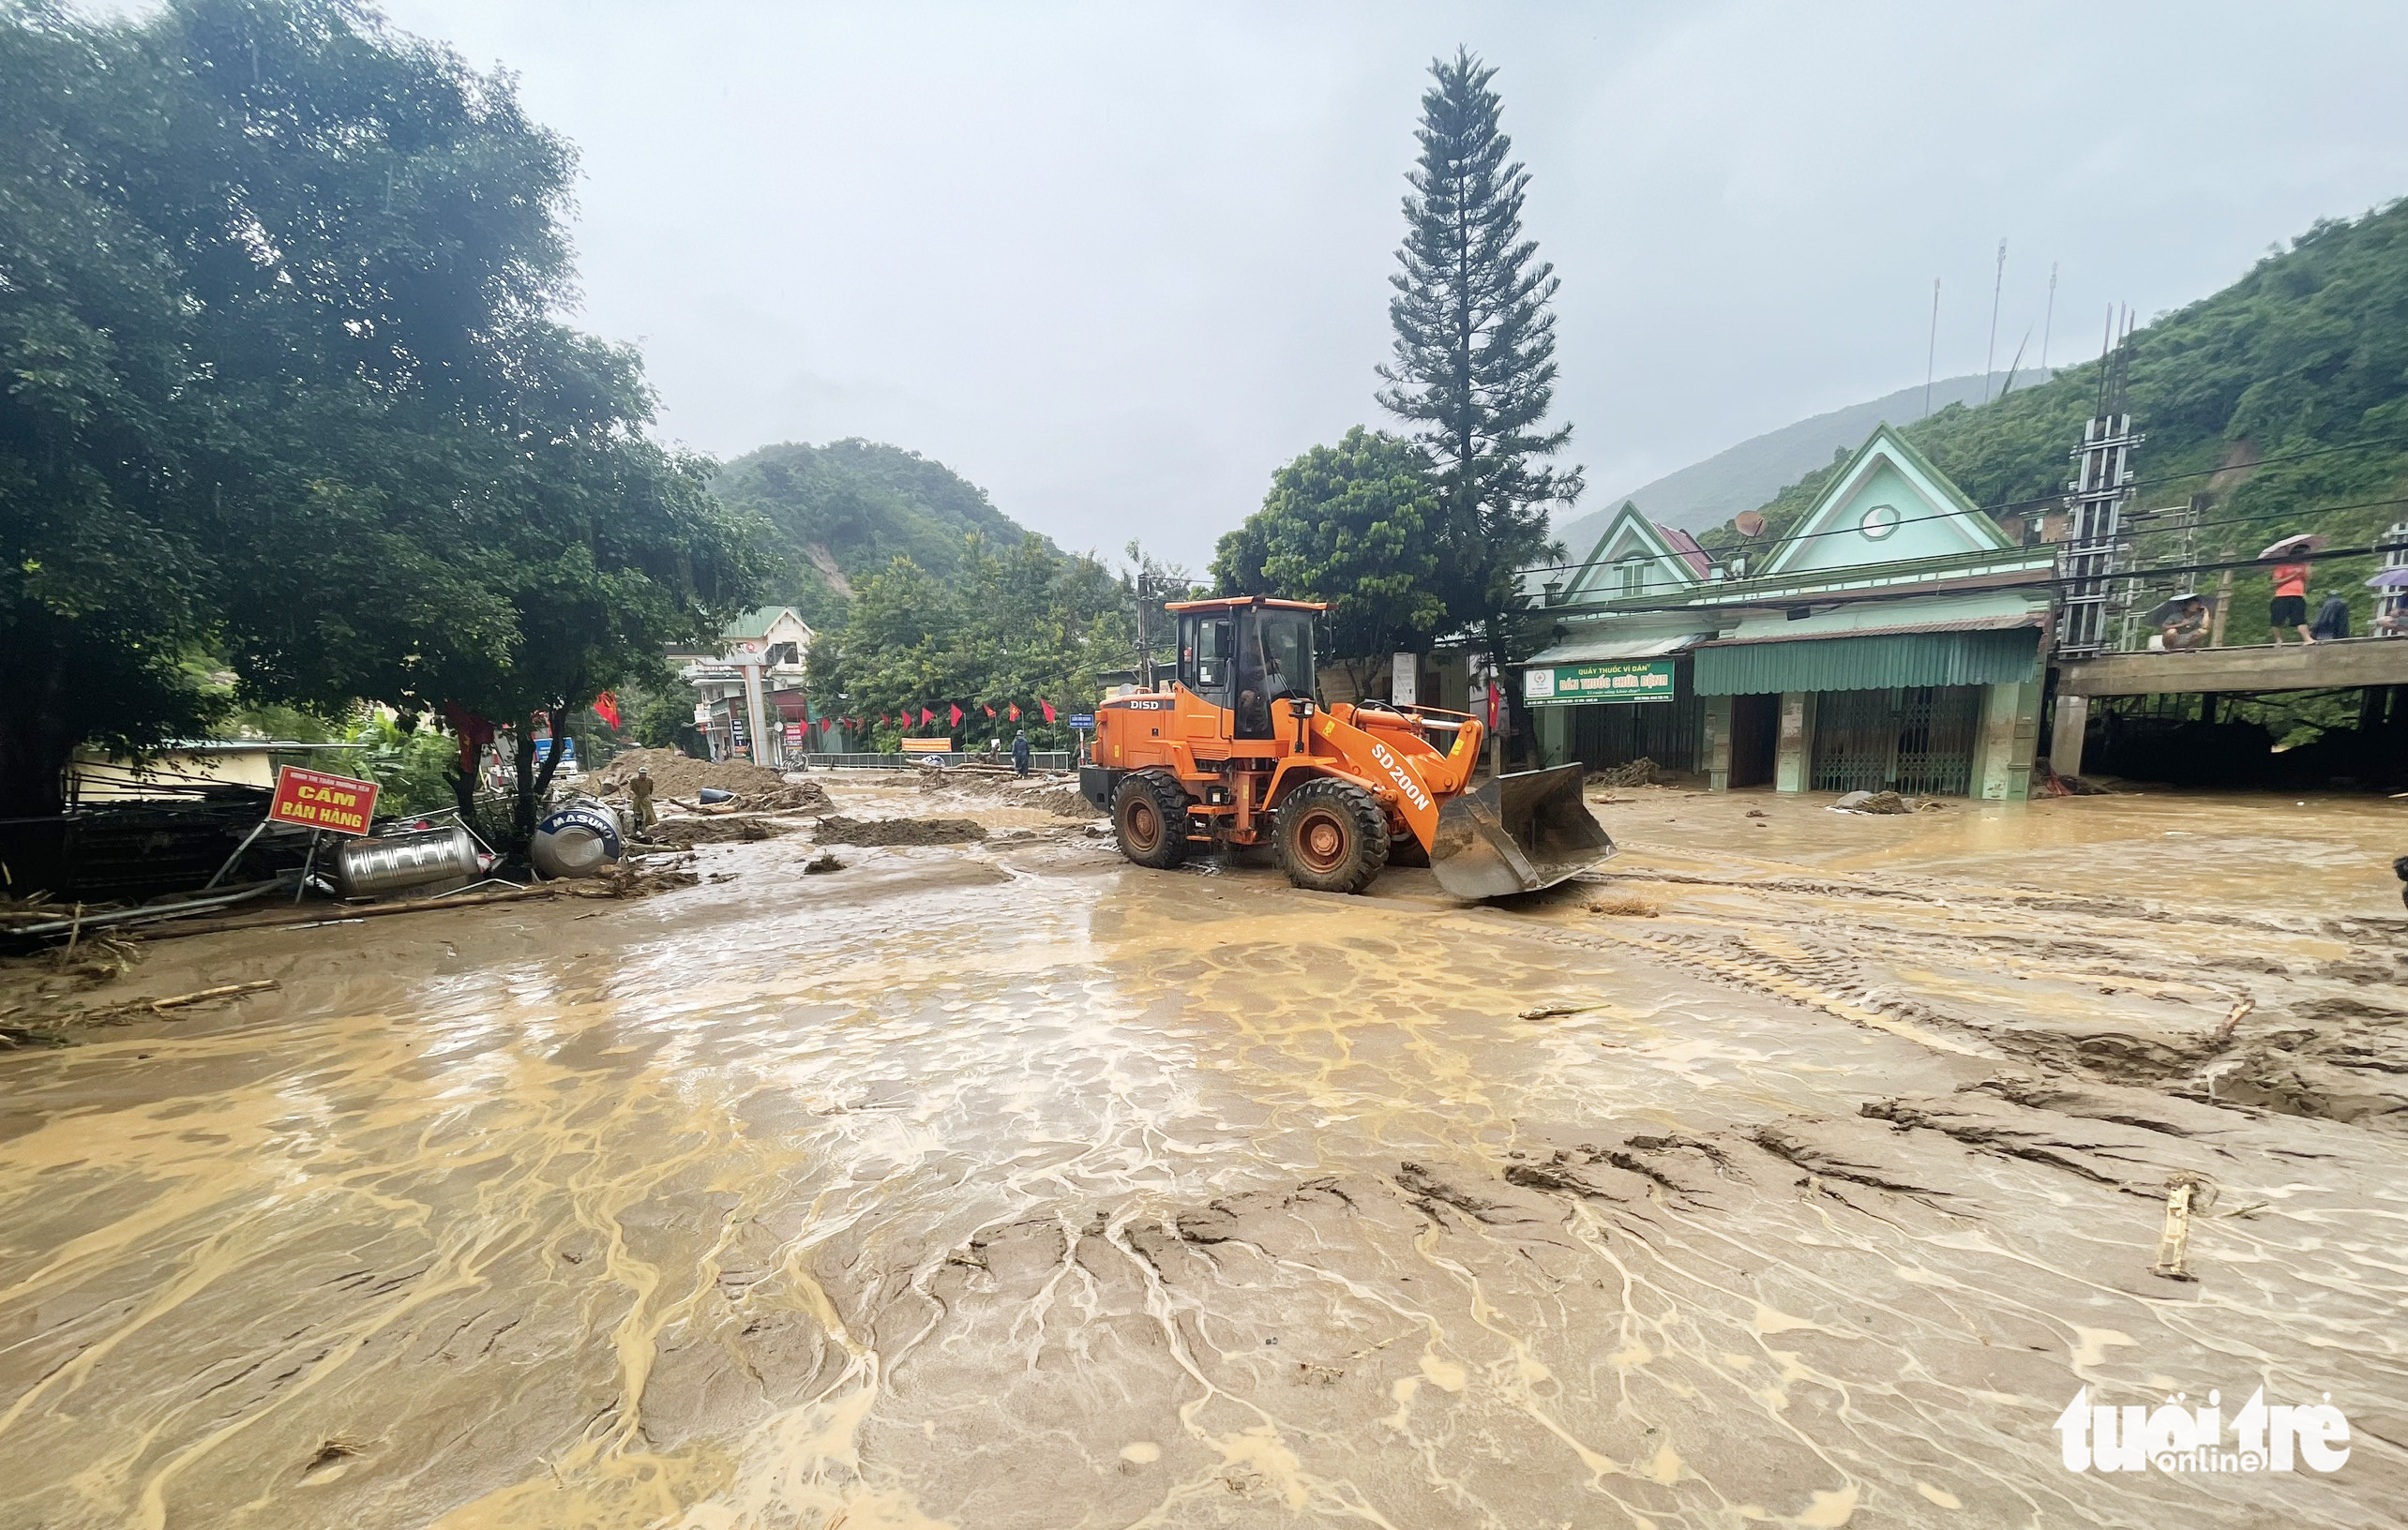 A bulldozer clears mud left on a street following a flash flood in Ky Son District, Nghe An Province, Vietnam, October 2, 2022. Photo: N. Thang / Tuoi Tre